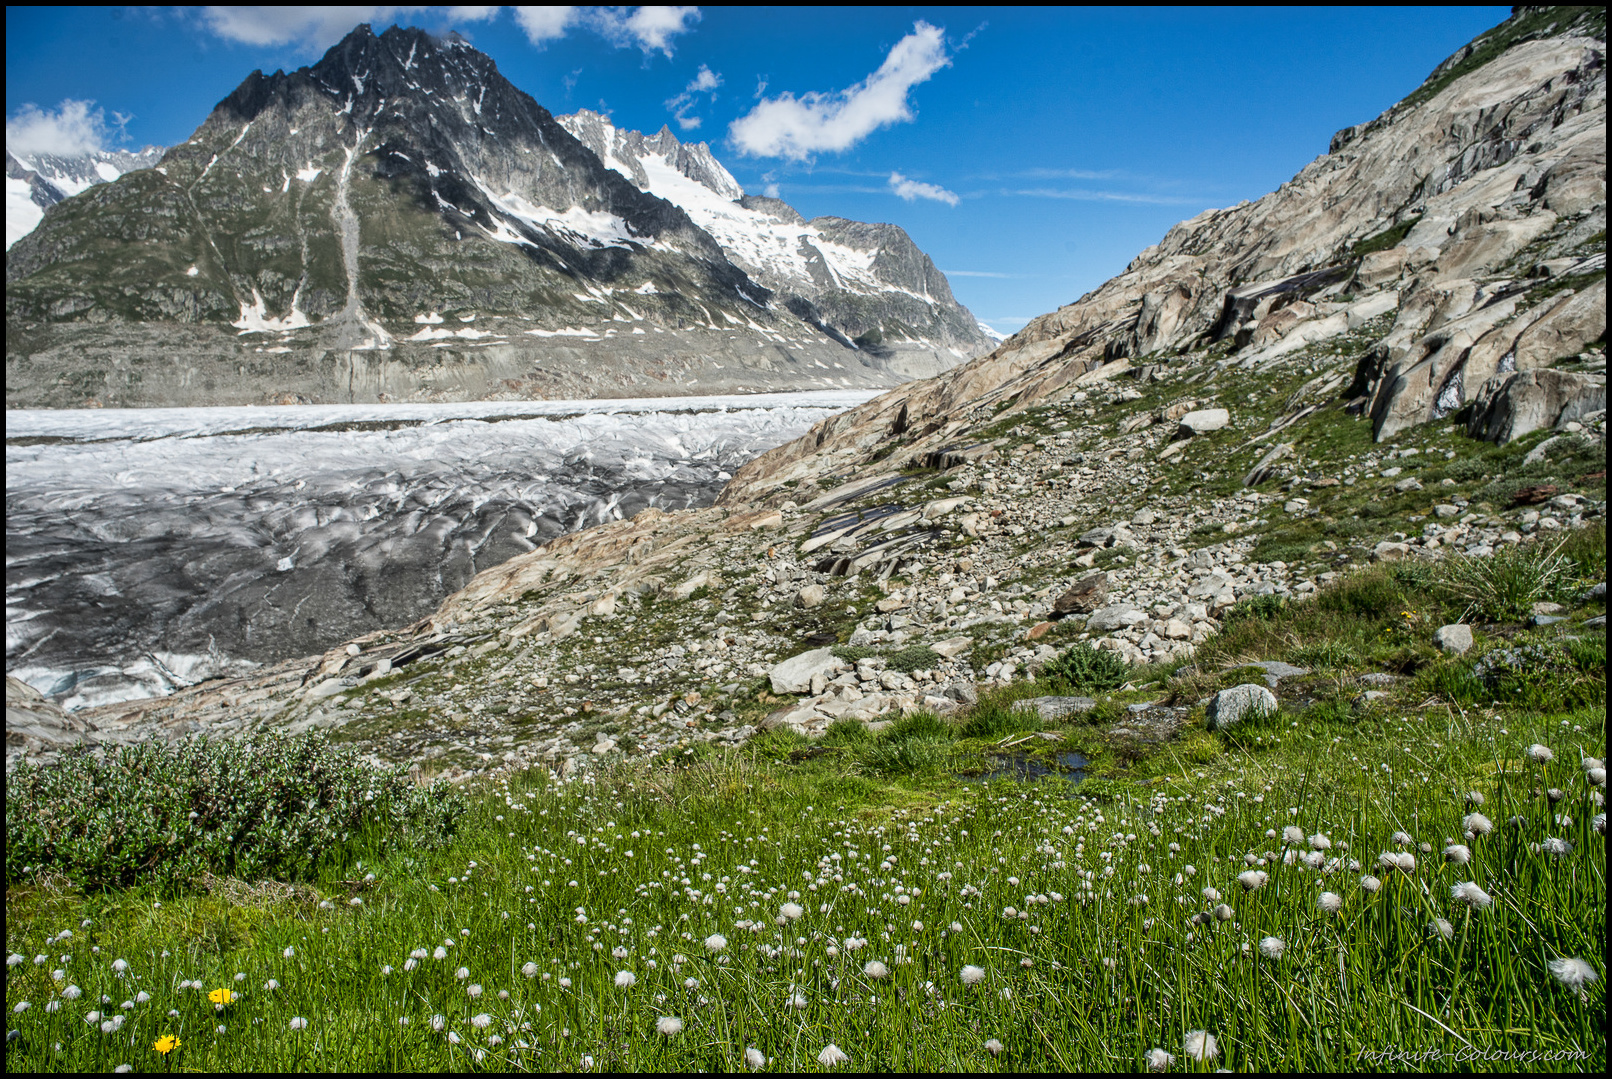 Patches of cotton grass surround the beautiful Märjelensee